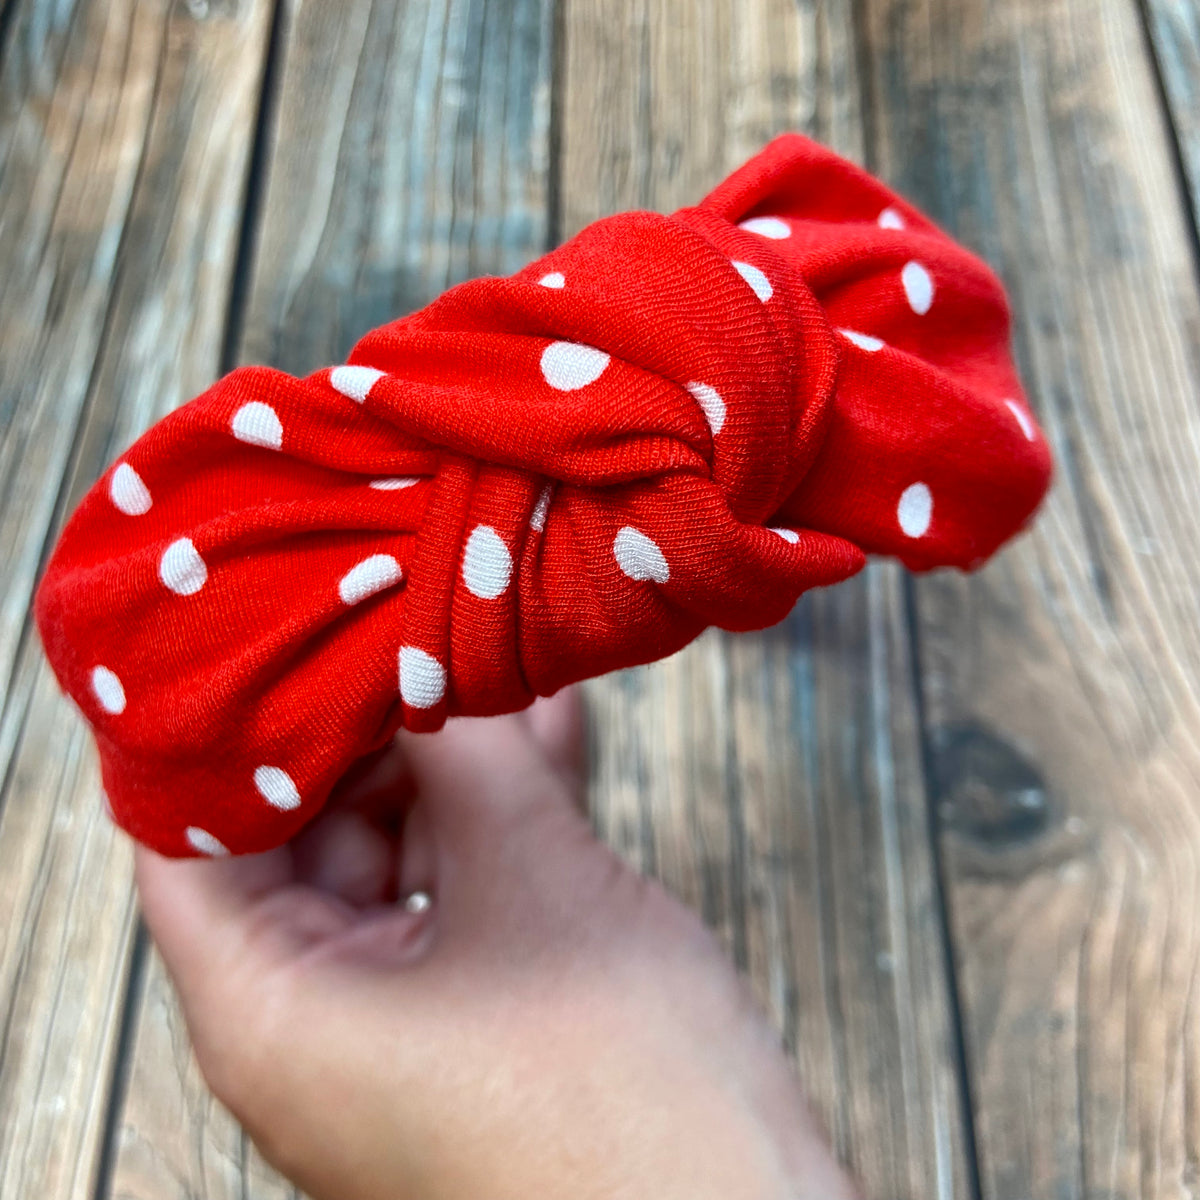 Red Polka Dot Structured Headbands